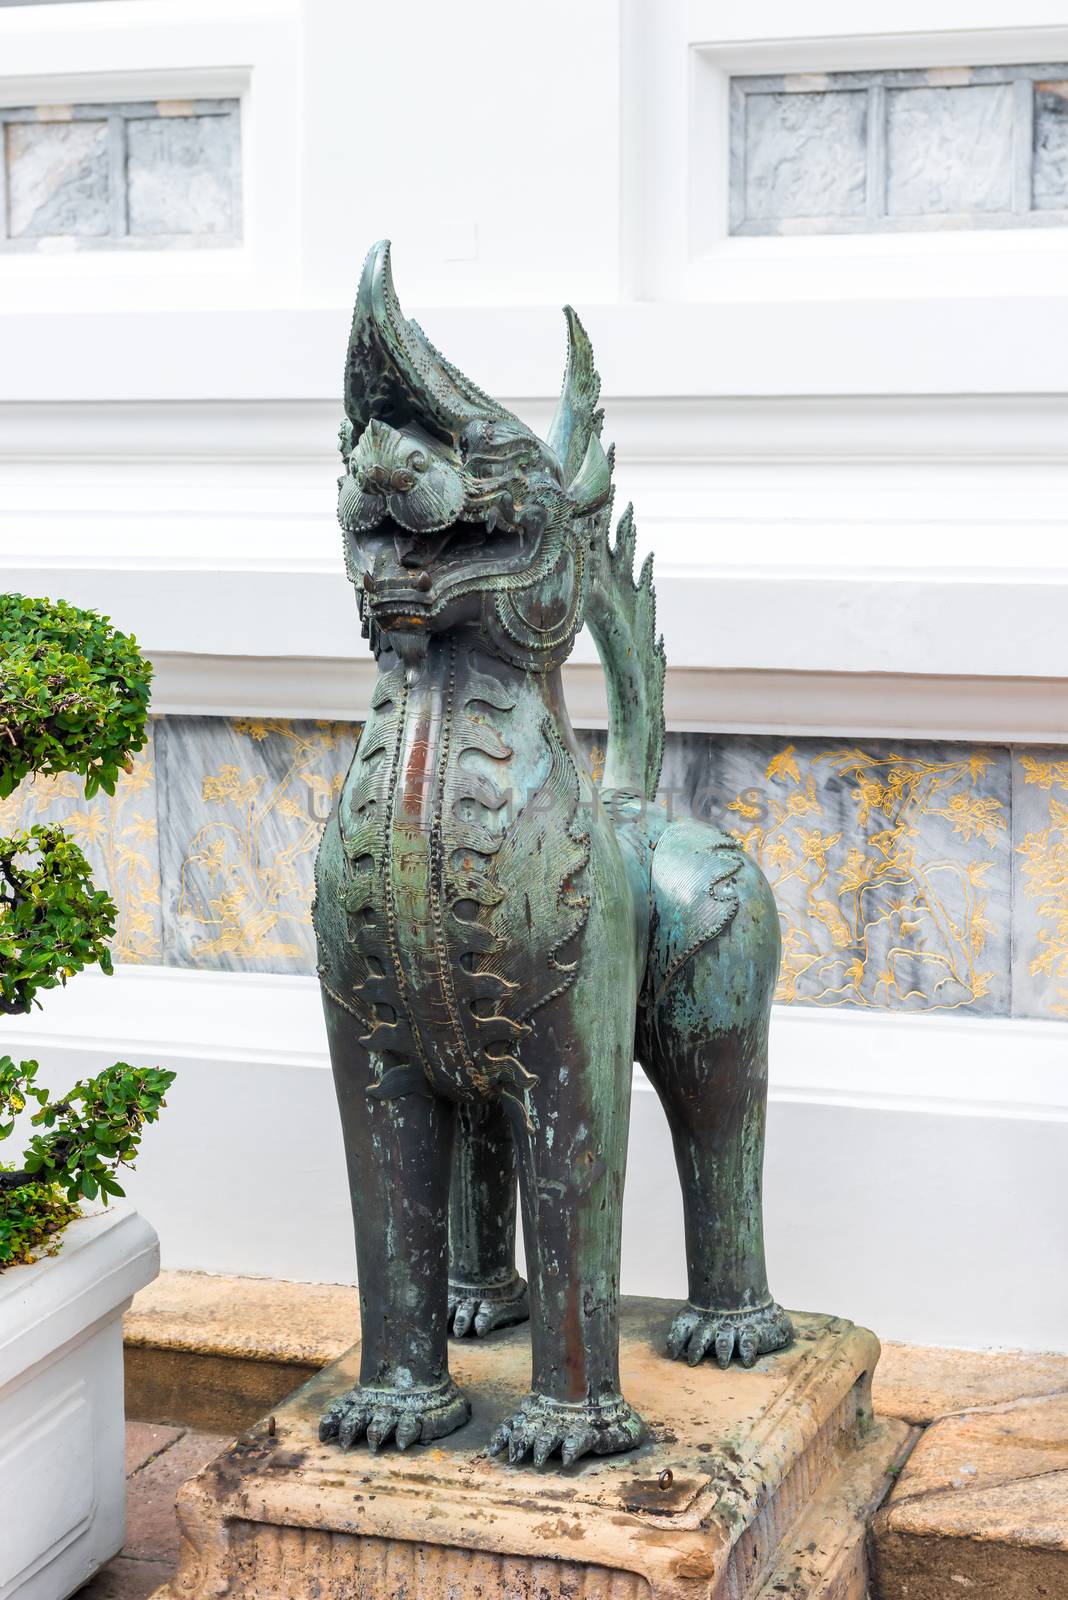 evil guard near the entrance to the temple in the form of an animal